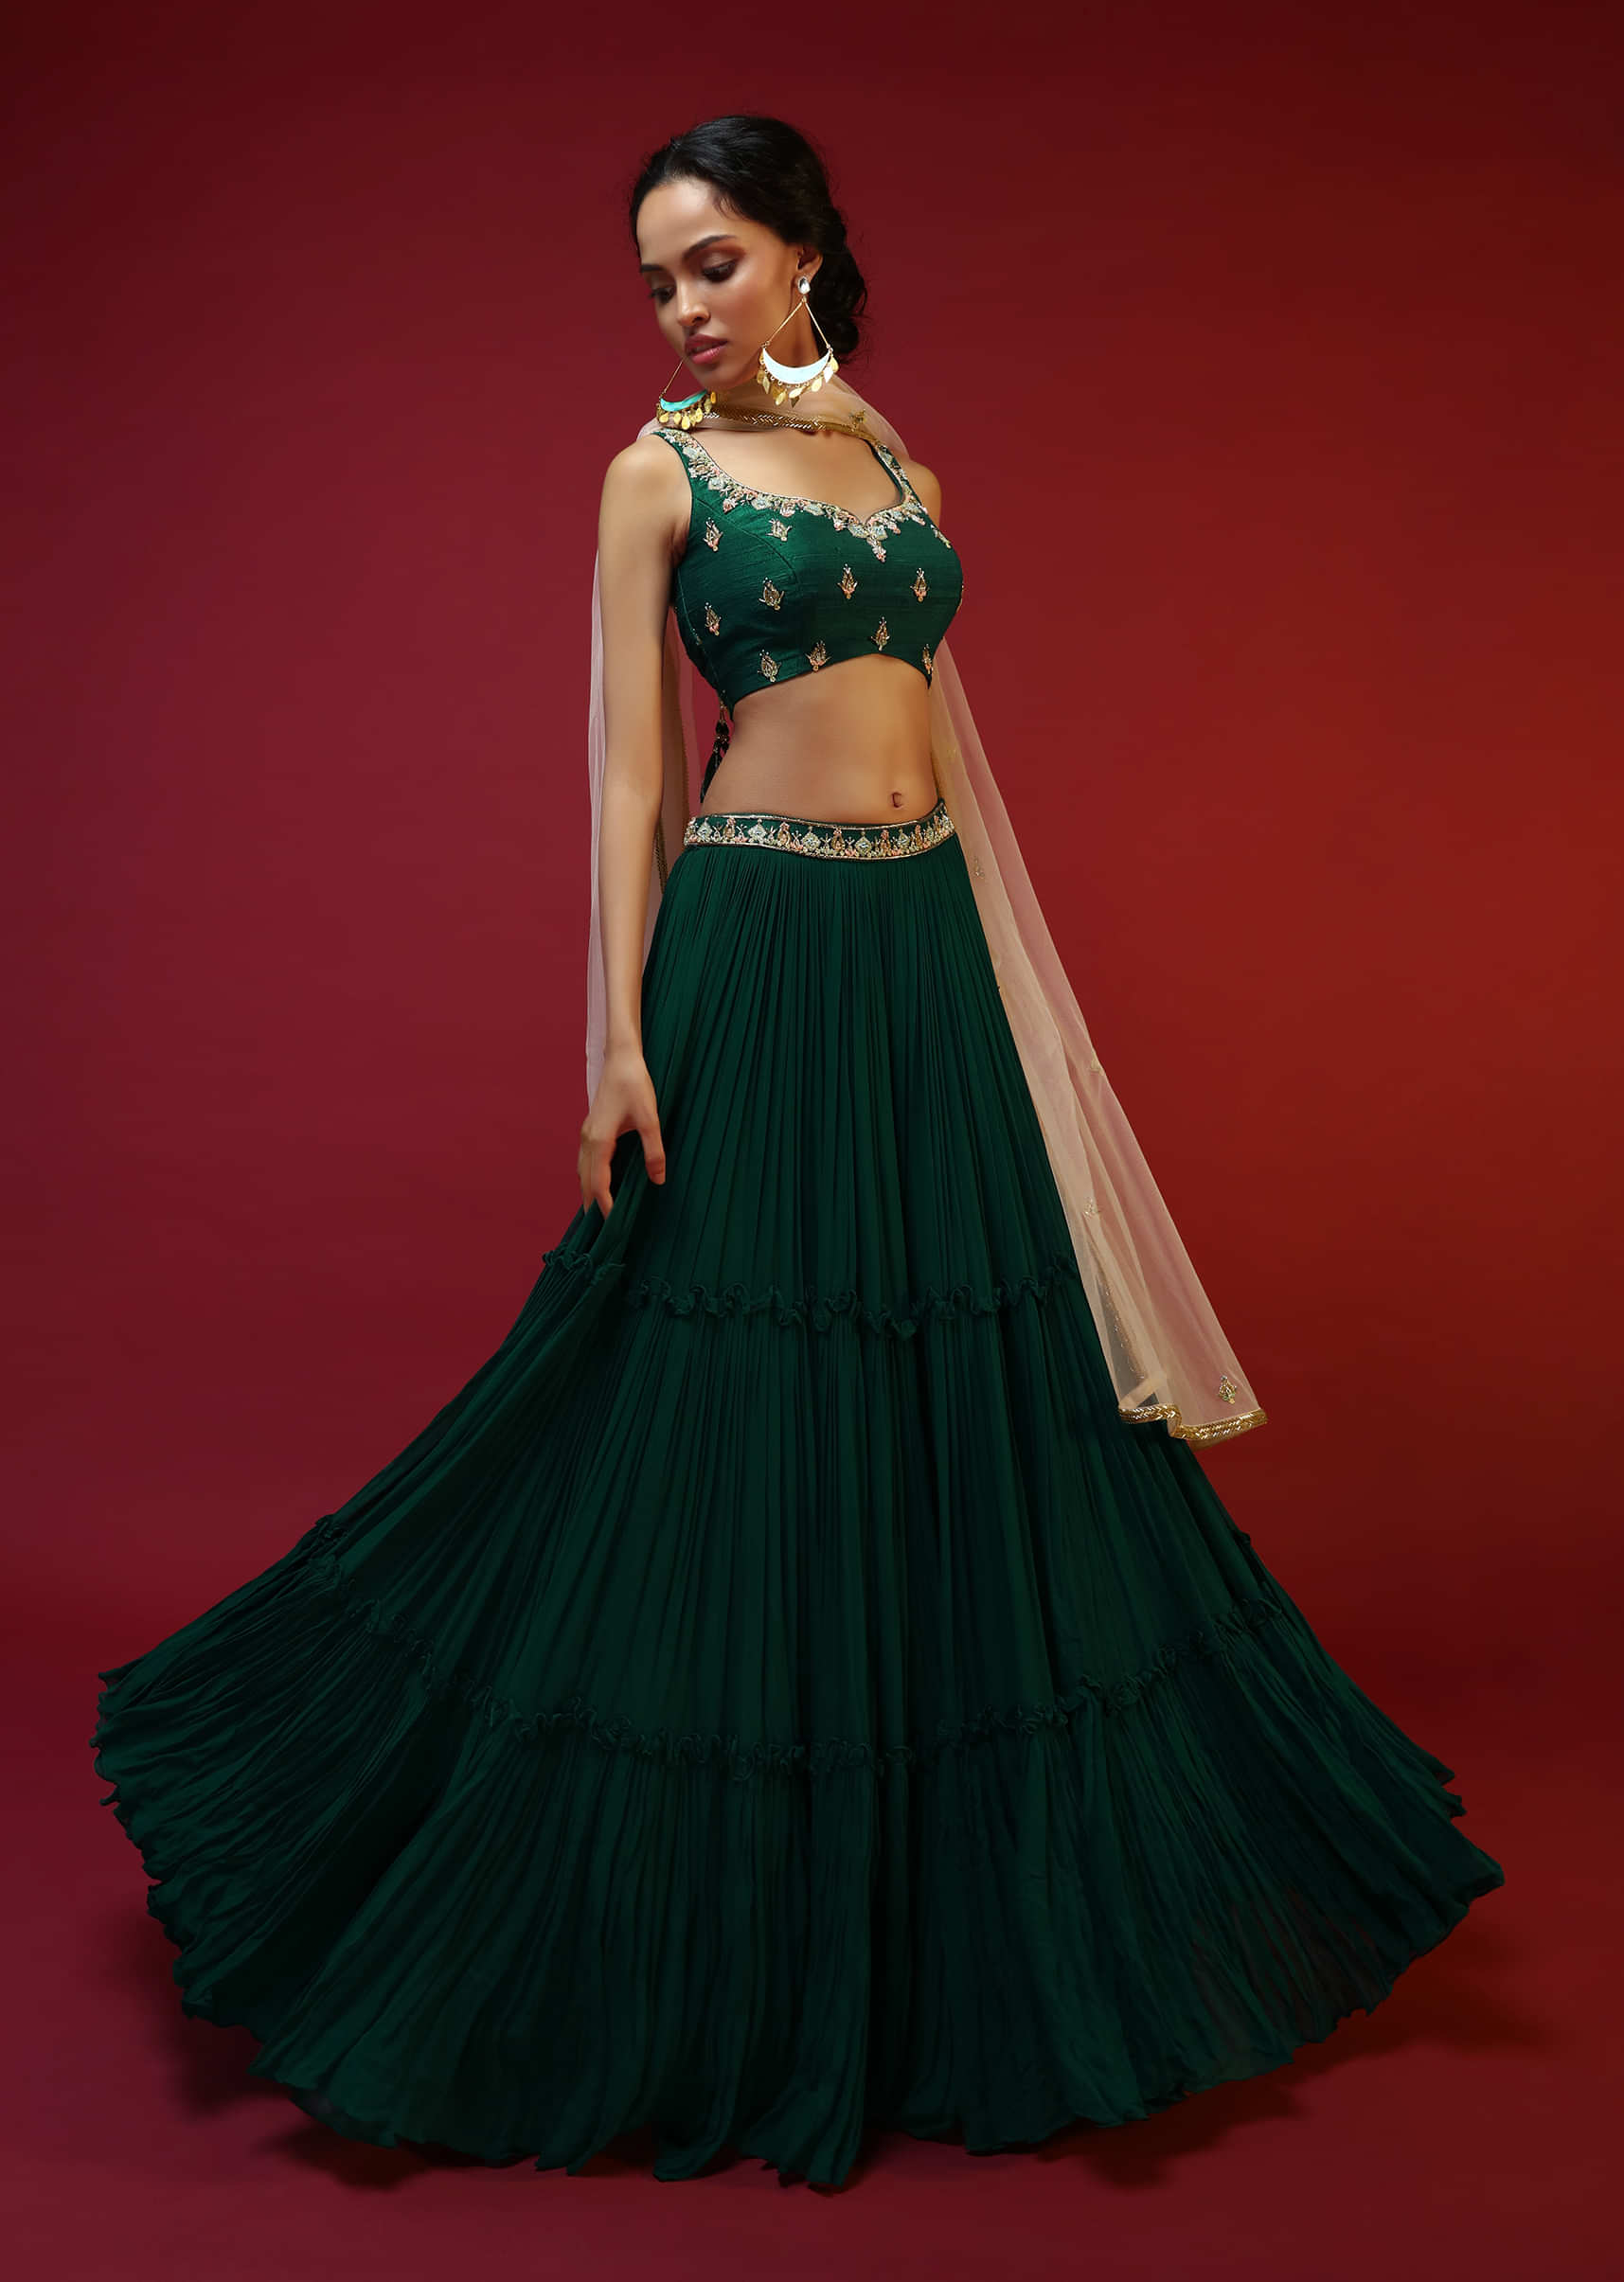 Bottle Green Tiered Lehenga Choli With Hand Embroidered Buttis Using Colorful Beads And Sequins 